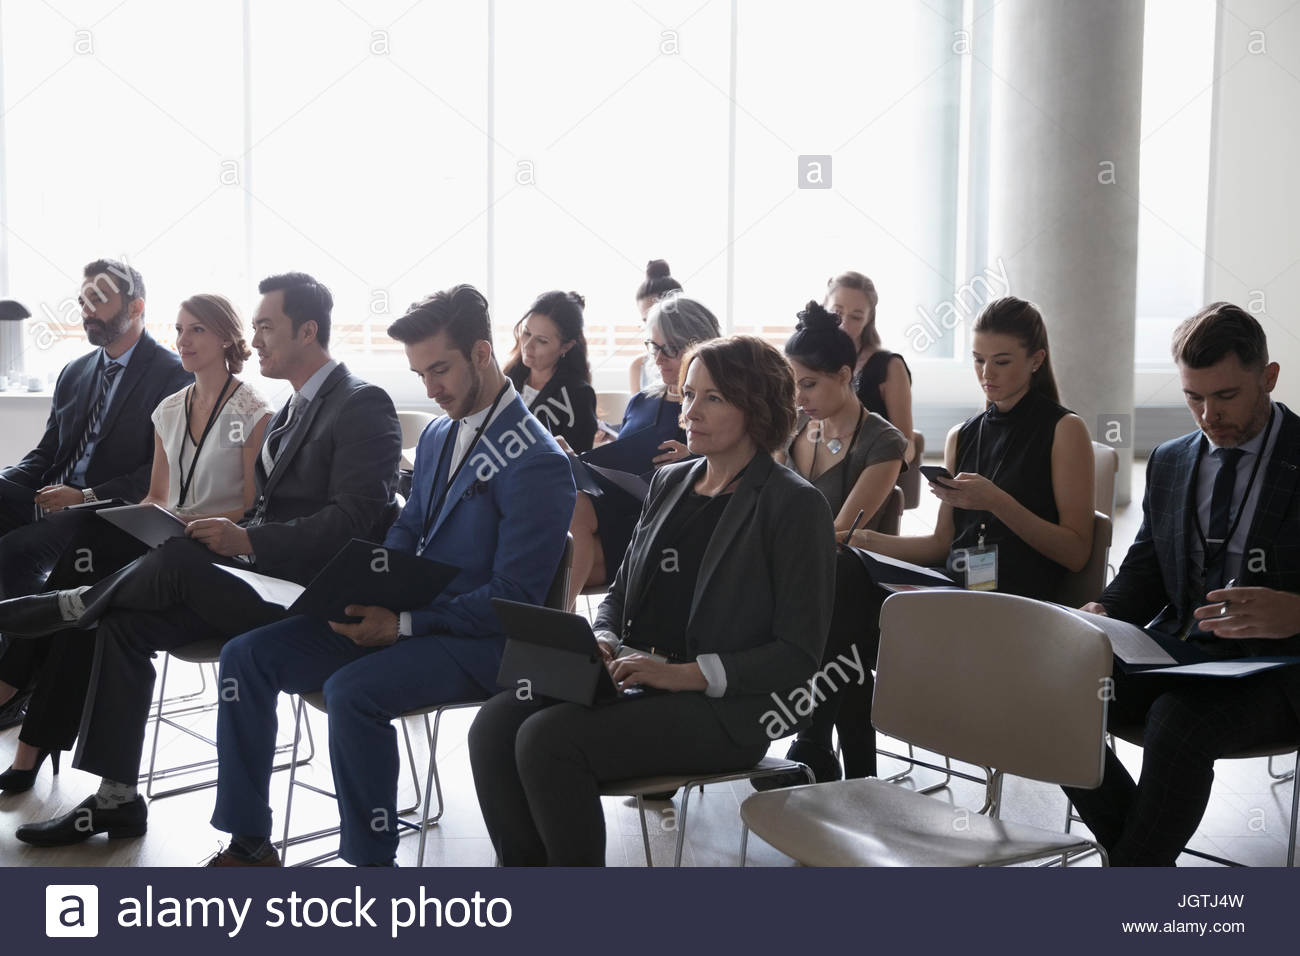 Business people with paperwork using cell phones and digital tablets in conference audience Stock Photo